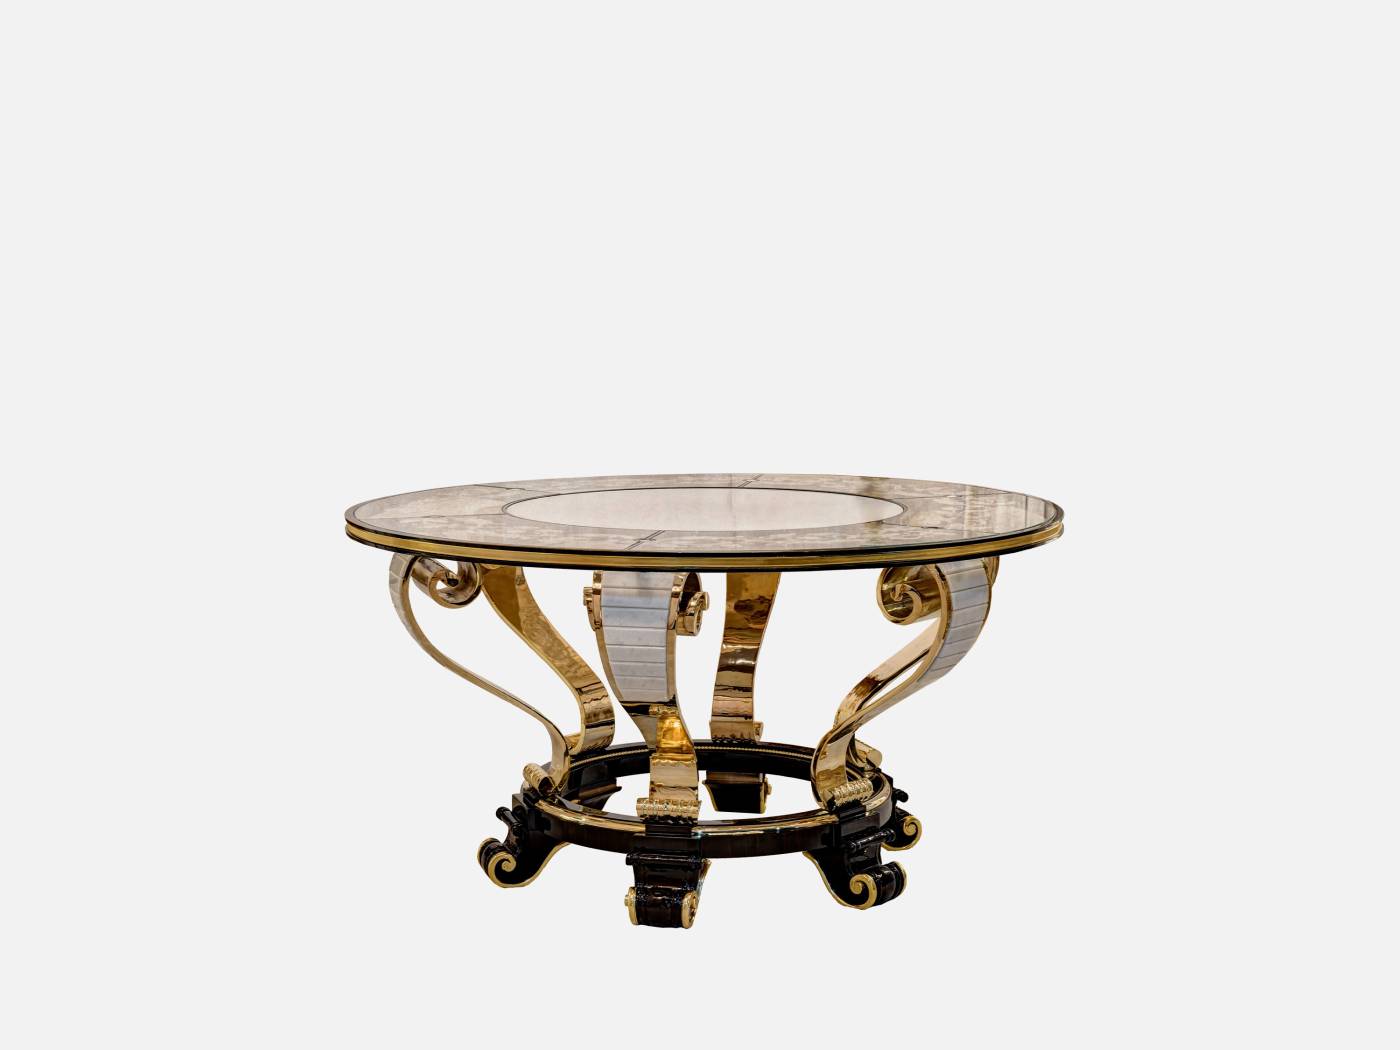 ART. 2084 – C.G. Capelletti Italian Luxury Classic Tables. Transform your space with sophisticated made in italy classic interior design.